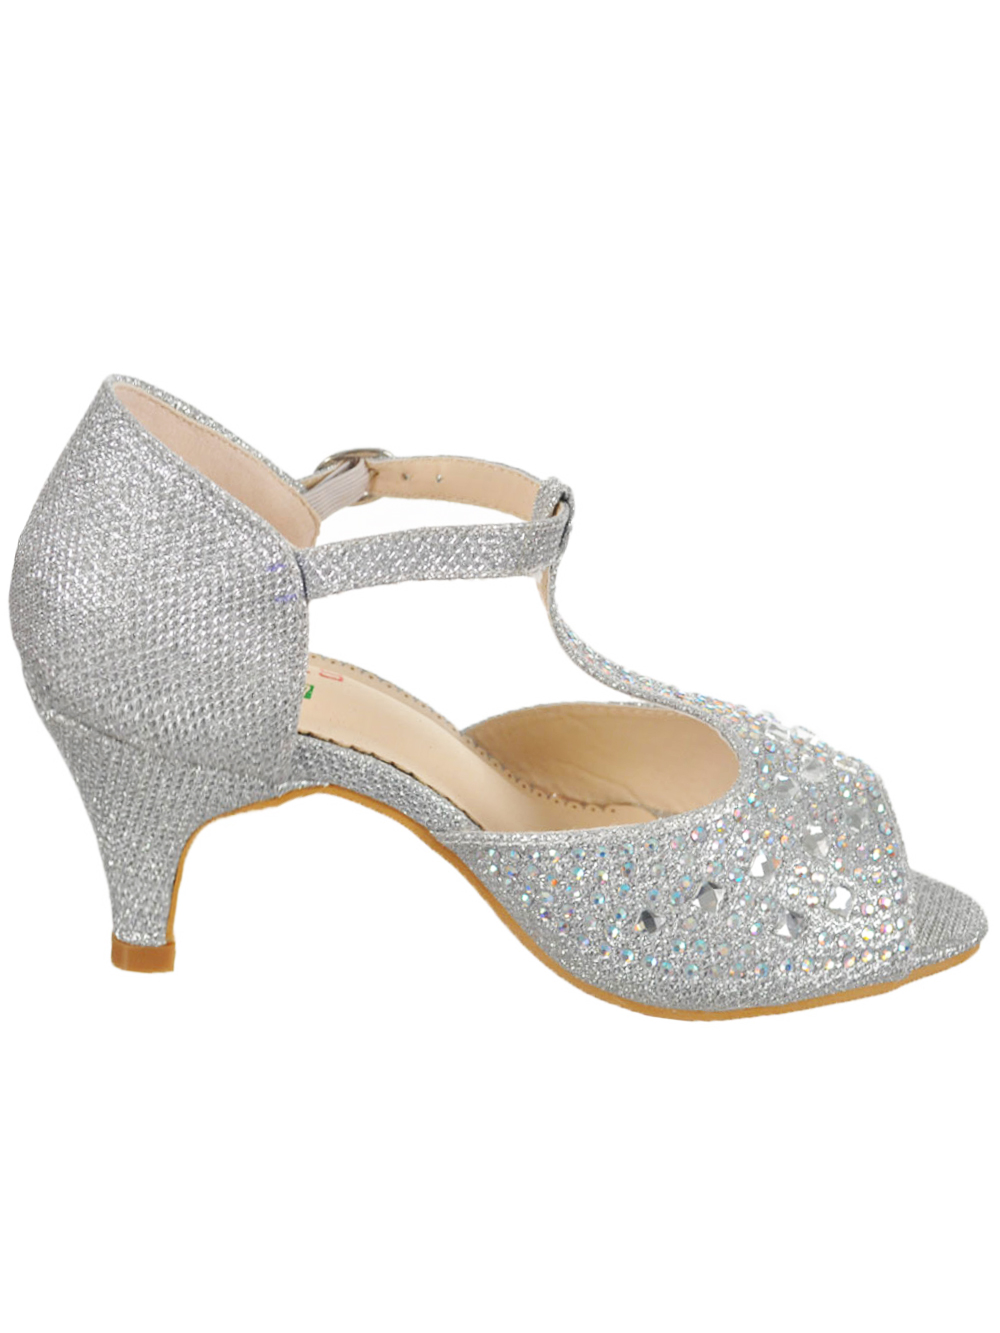 Angels Girls' Rhinestone T-Strap Pumps (Sizes 13 - 5) - silver, 5 youth - image 3 of 3